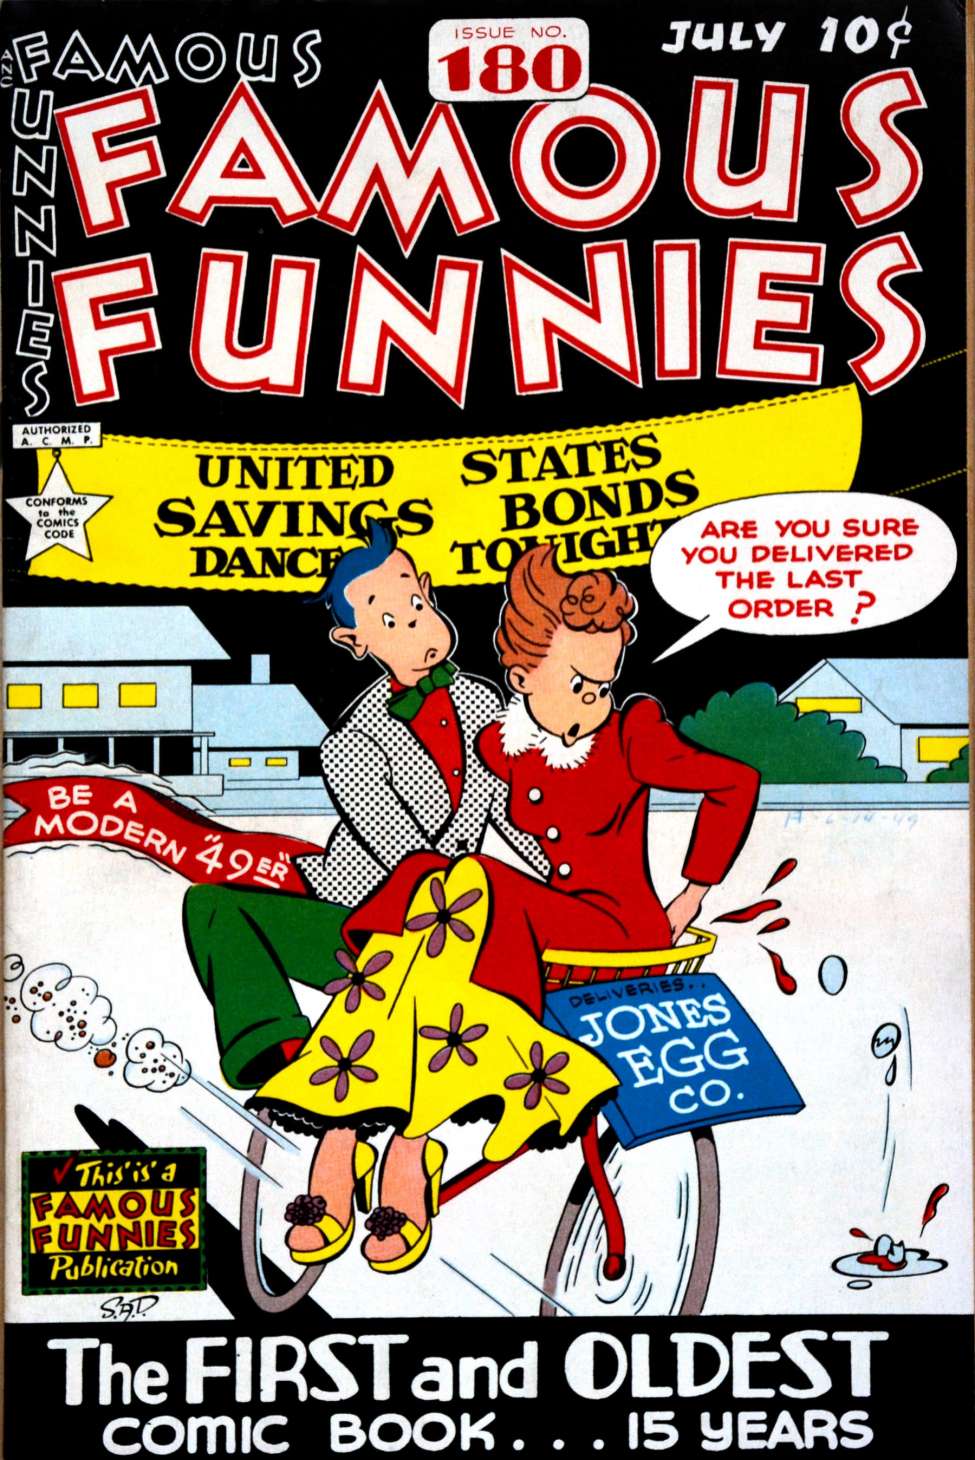 Comic Book Cover For Famous Funnies 180